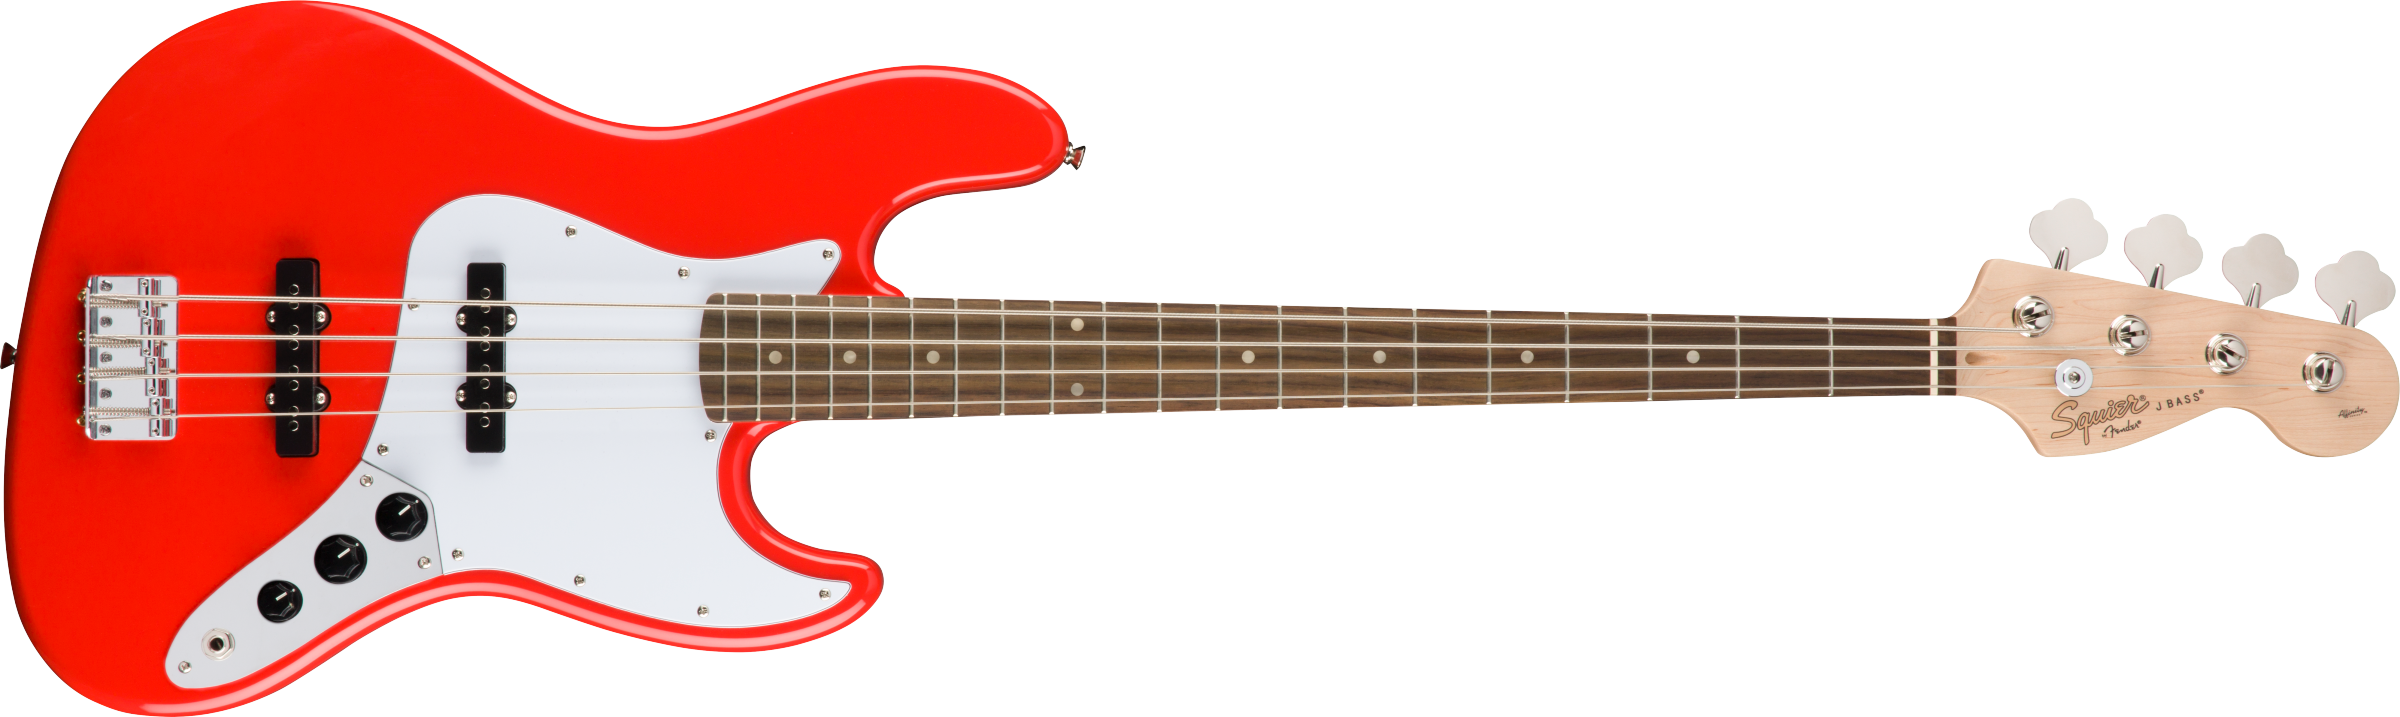 Squier Affinity Series Jazz Bass, Race Red 0370760570